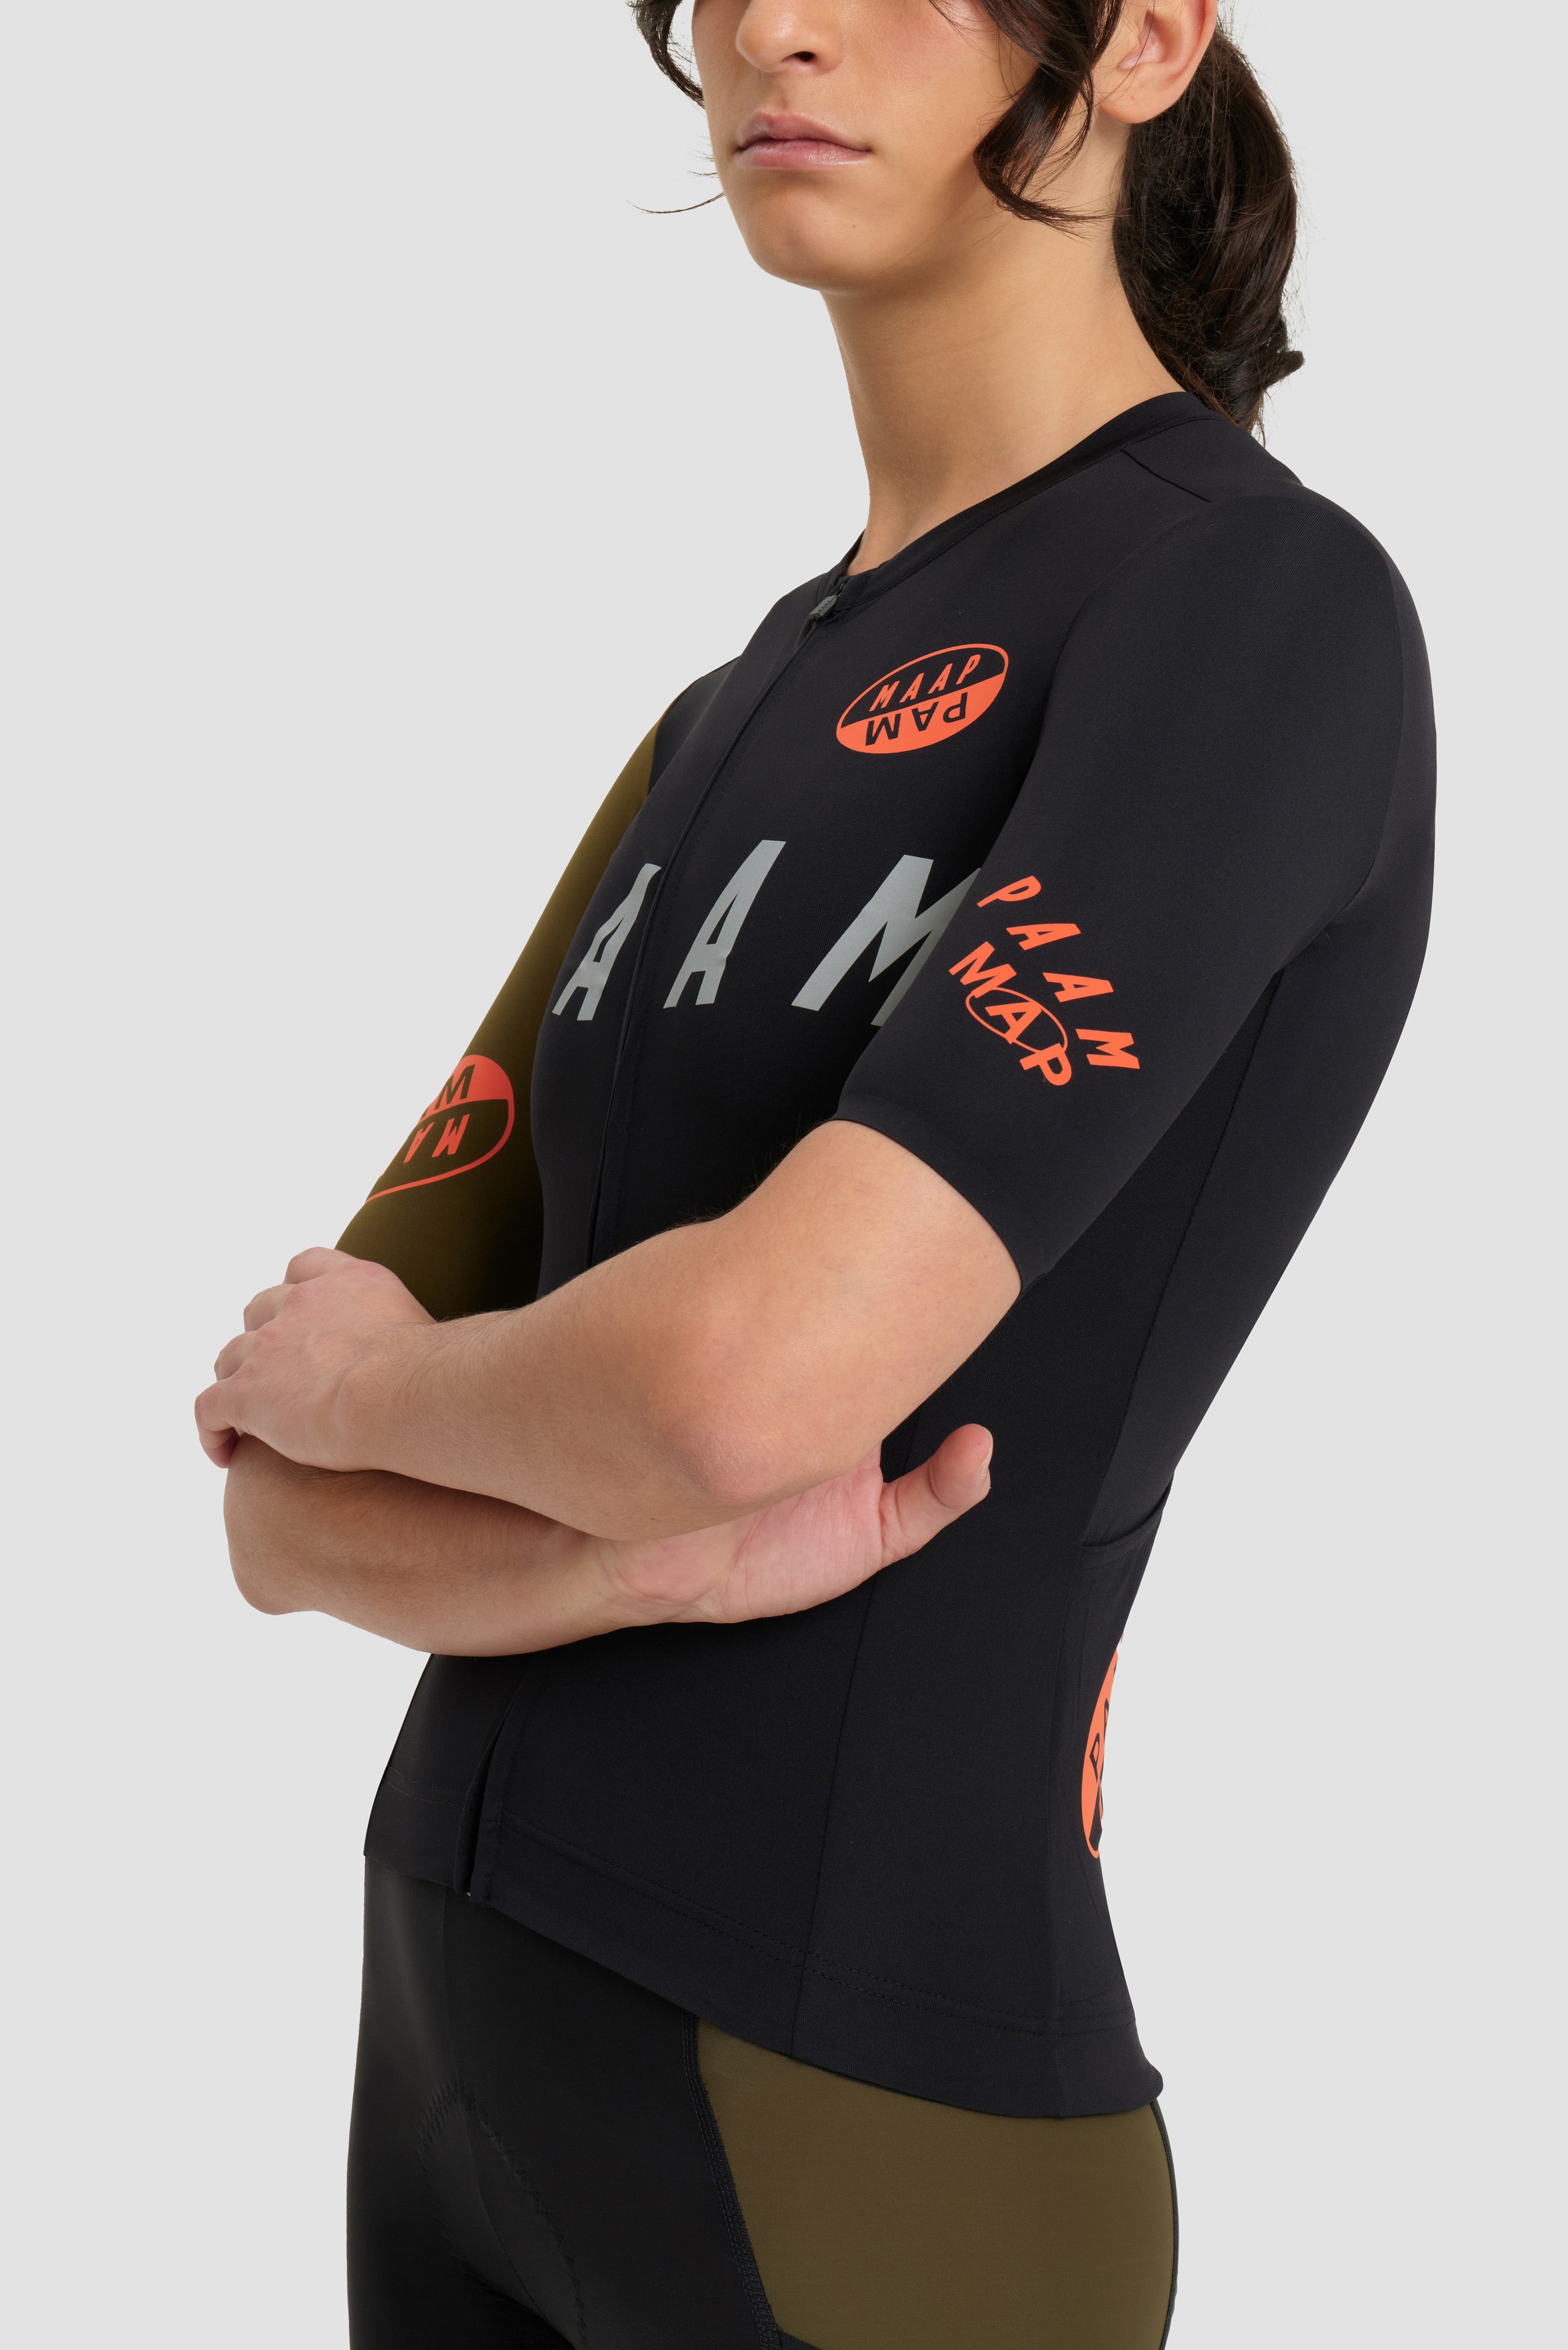 The PAAM 2.0 WOMEN'S TEAM JERSEY  available online with global shipping, and in PAM Stores Melbourne and Sydney.